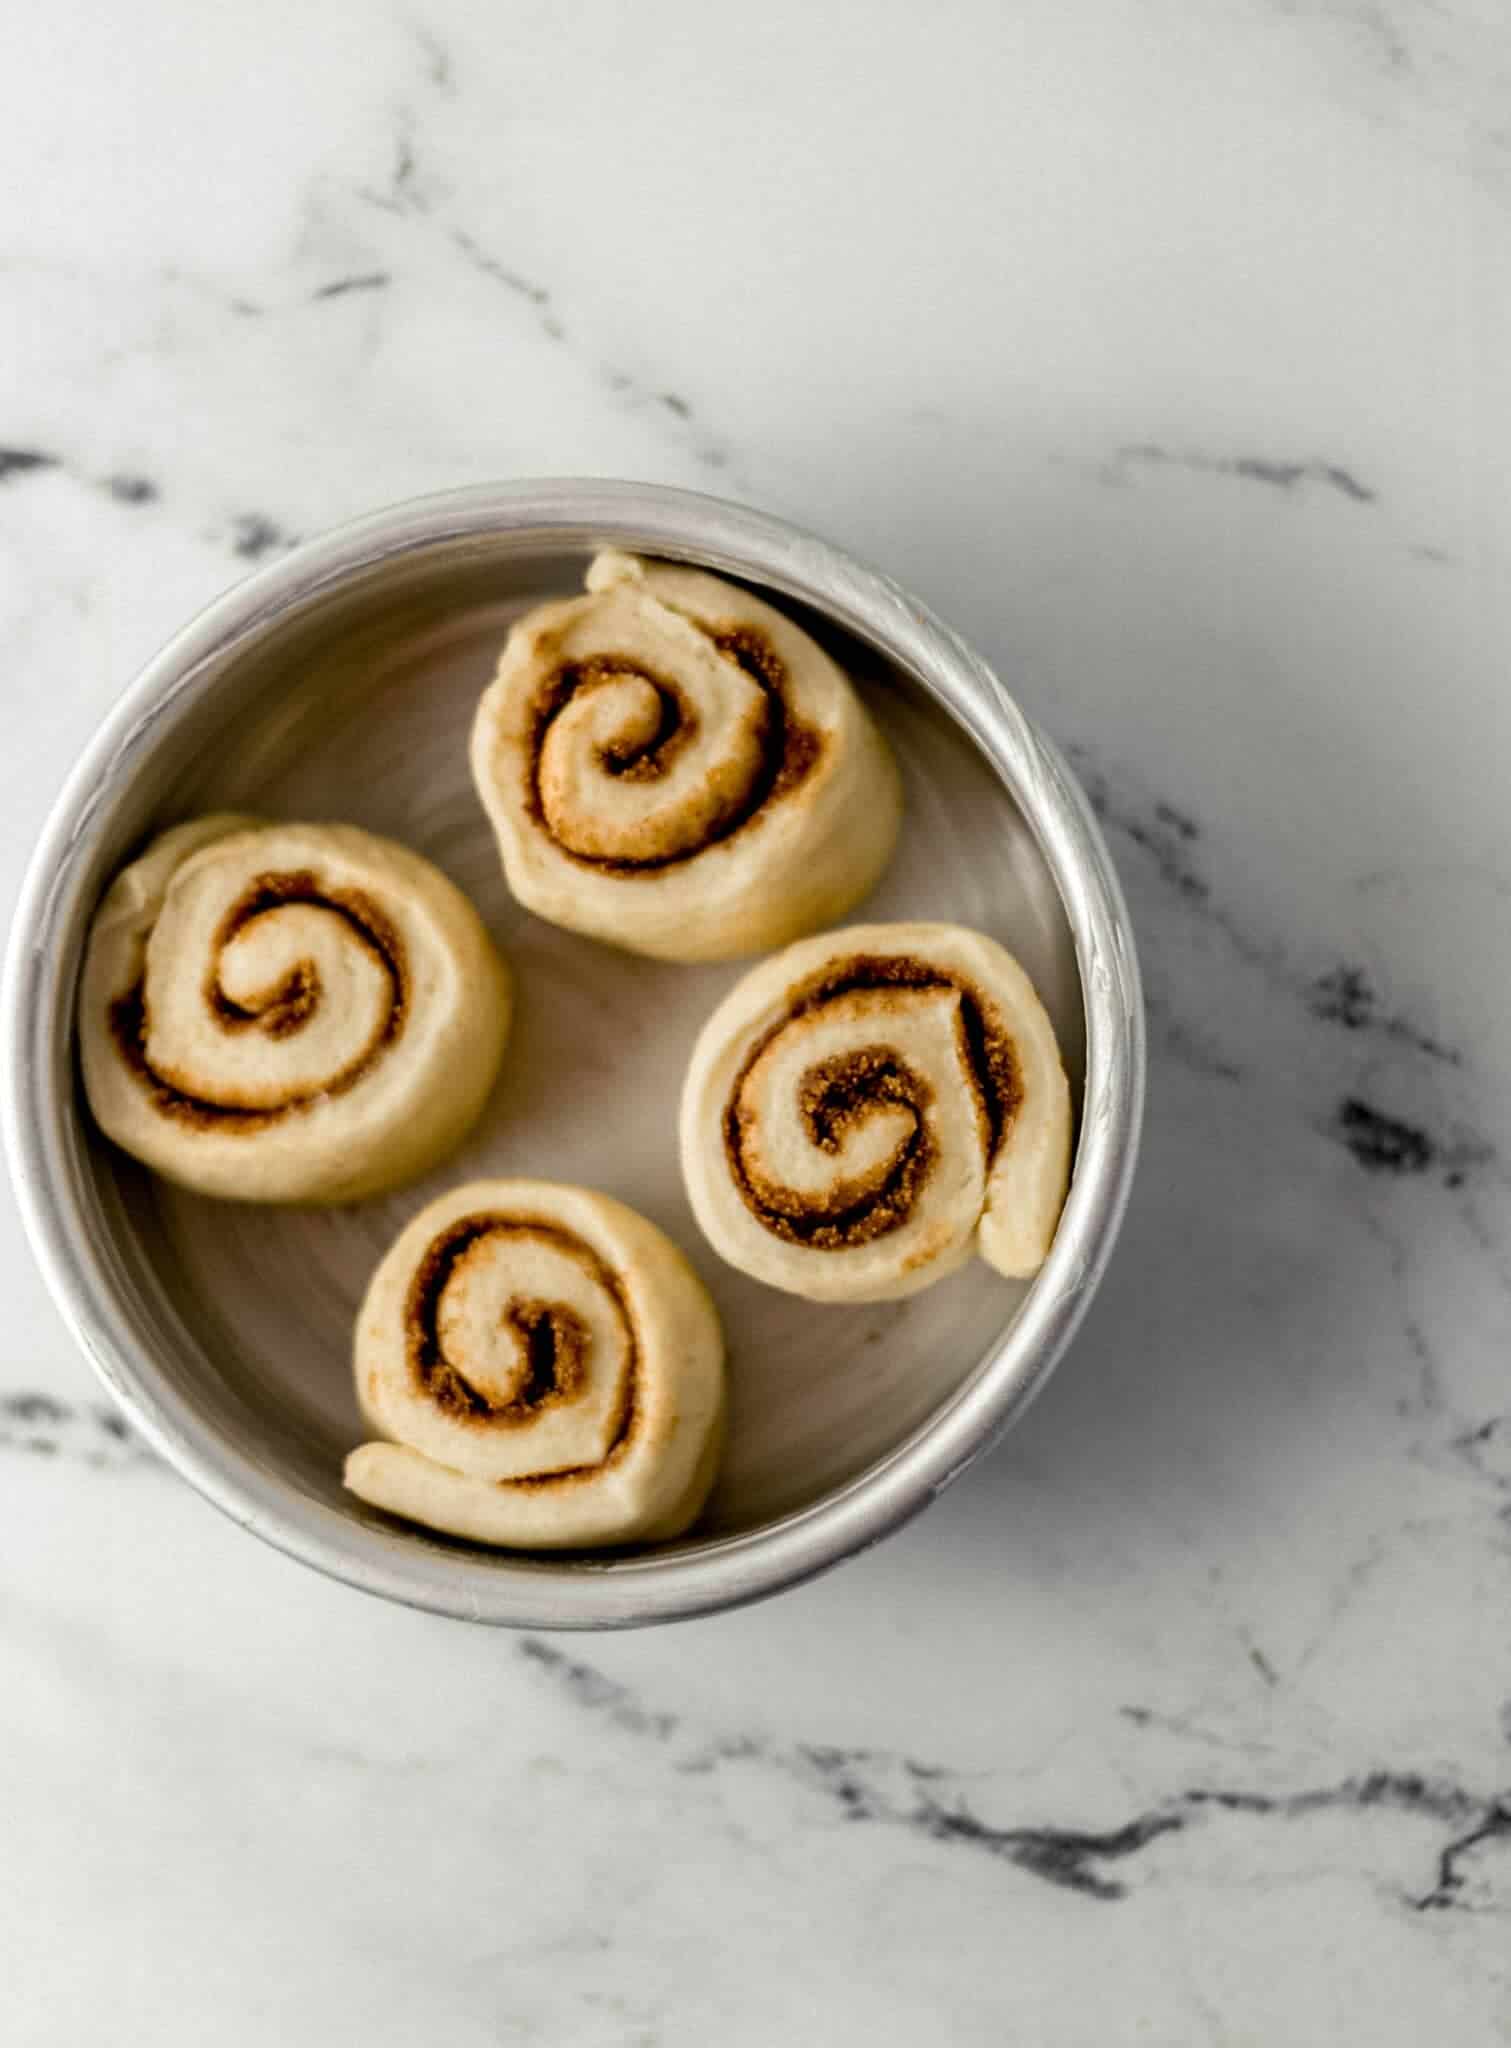 unbaked cinnamon rolls in buttered baking pan after rising 